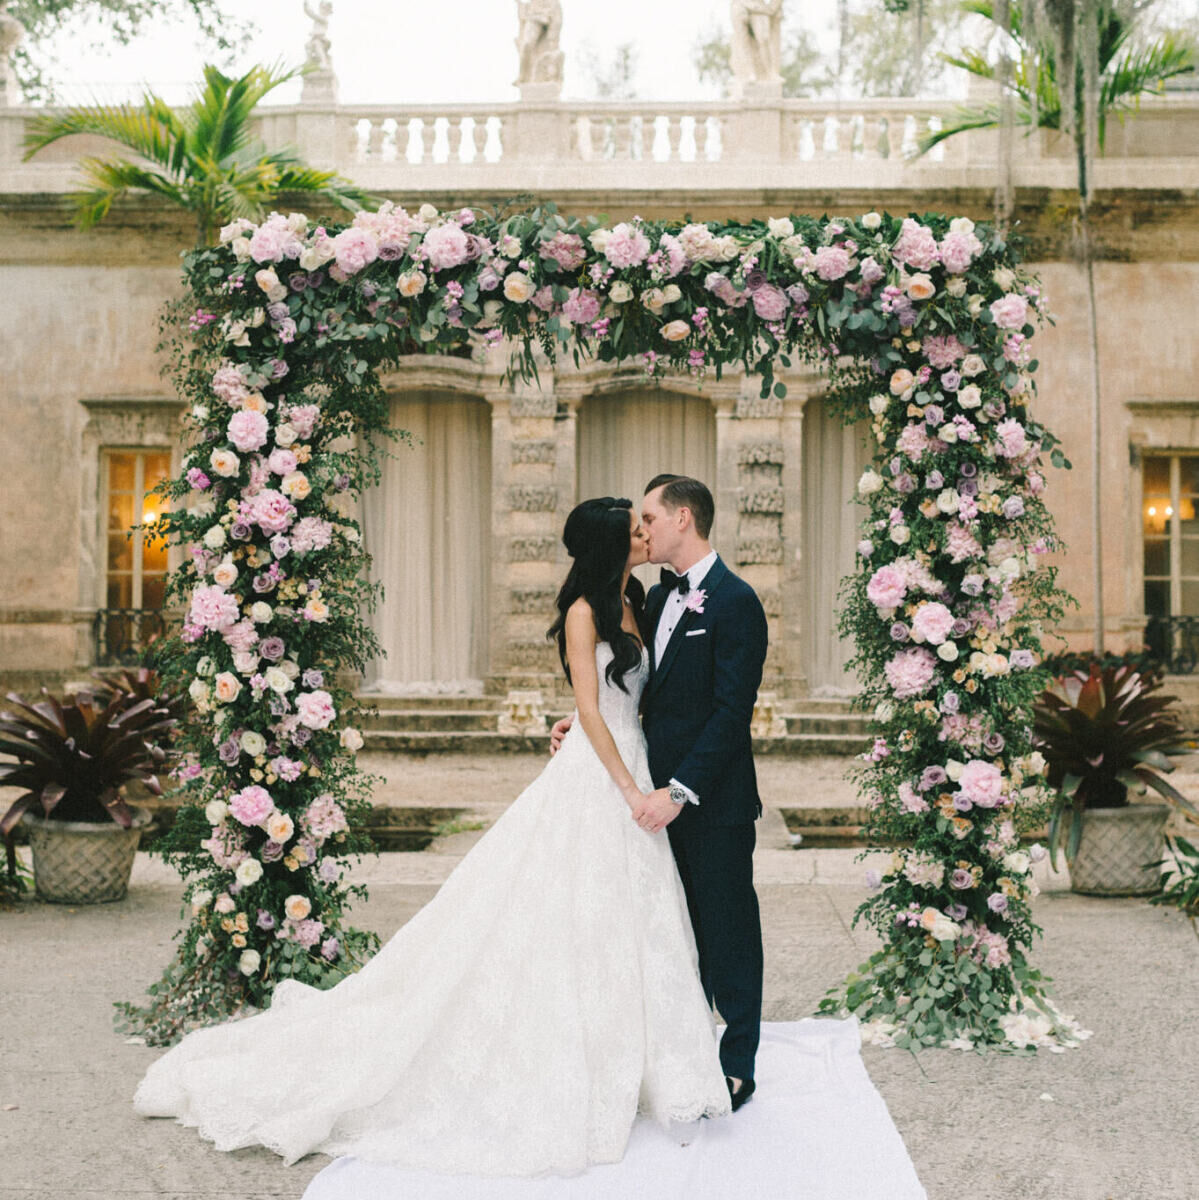 A bride and groom kiss in front of their floral arch during their glam, garden wedding.